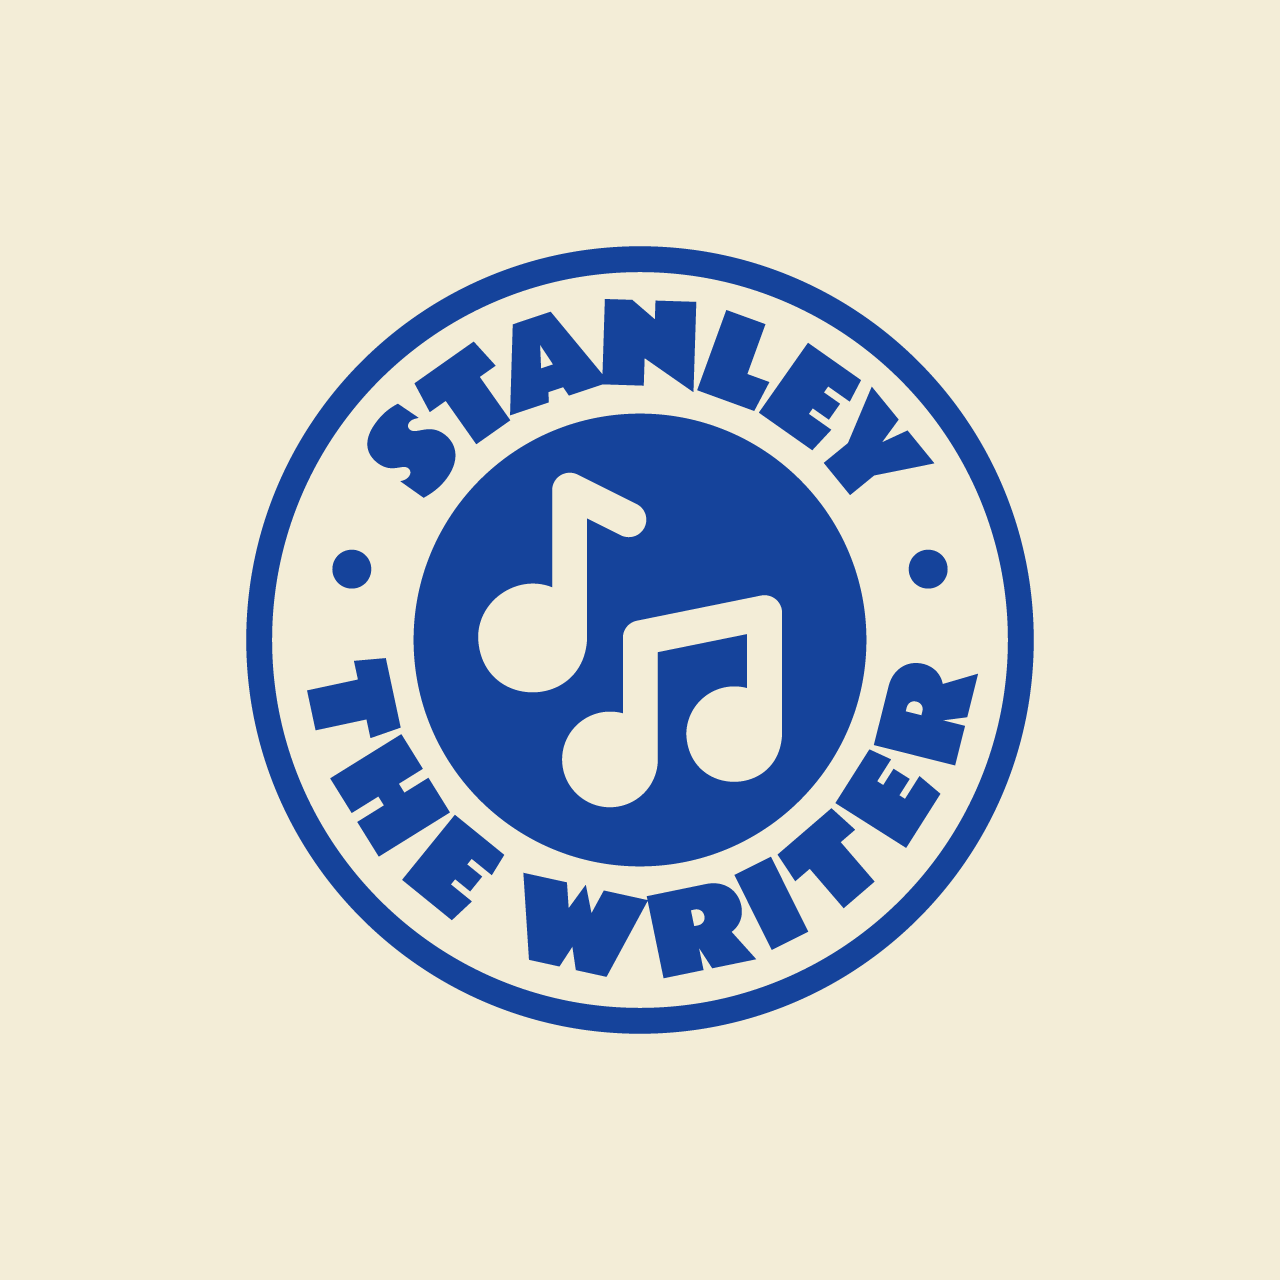 stanley-the-writer-1